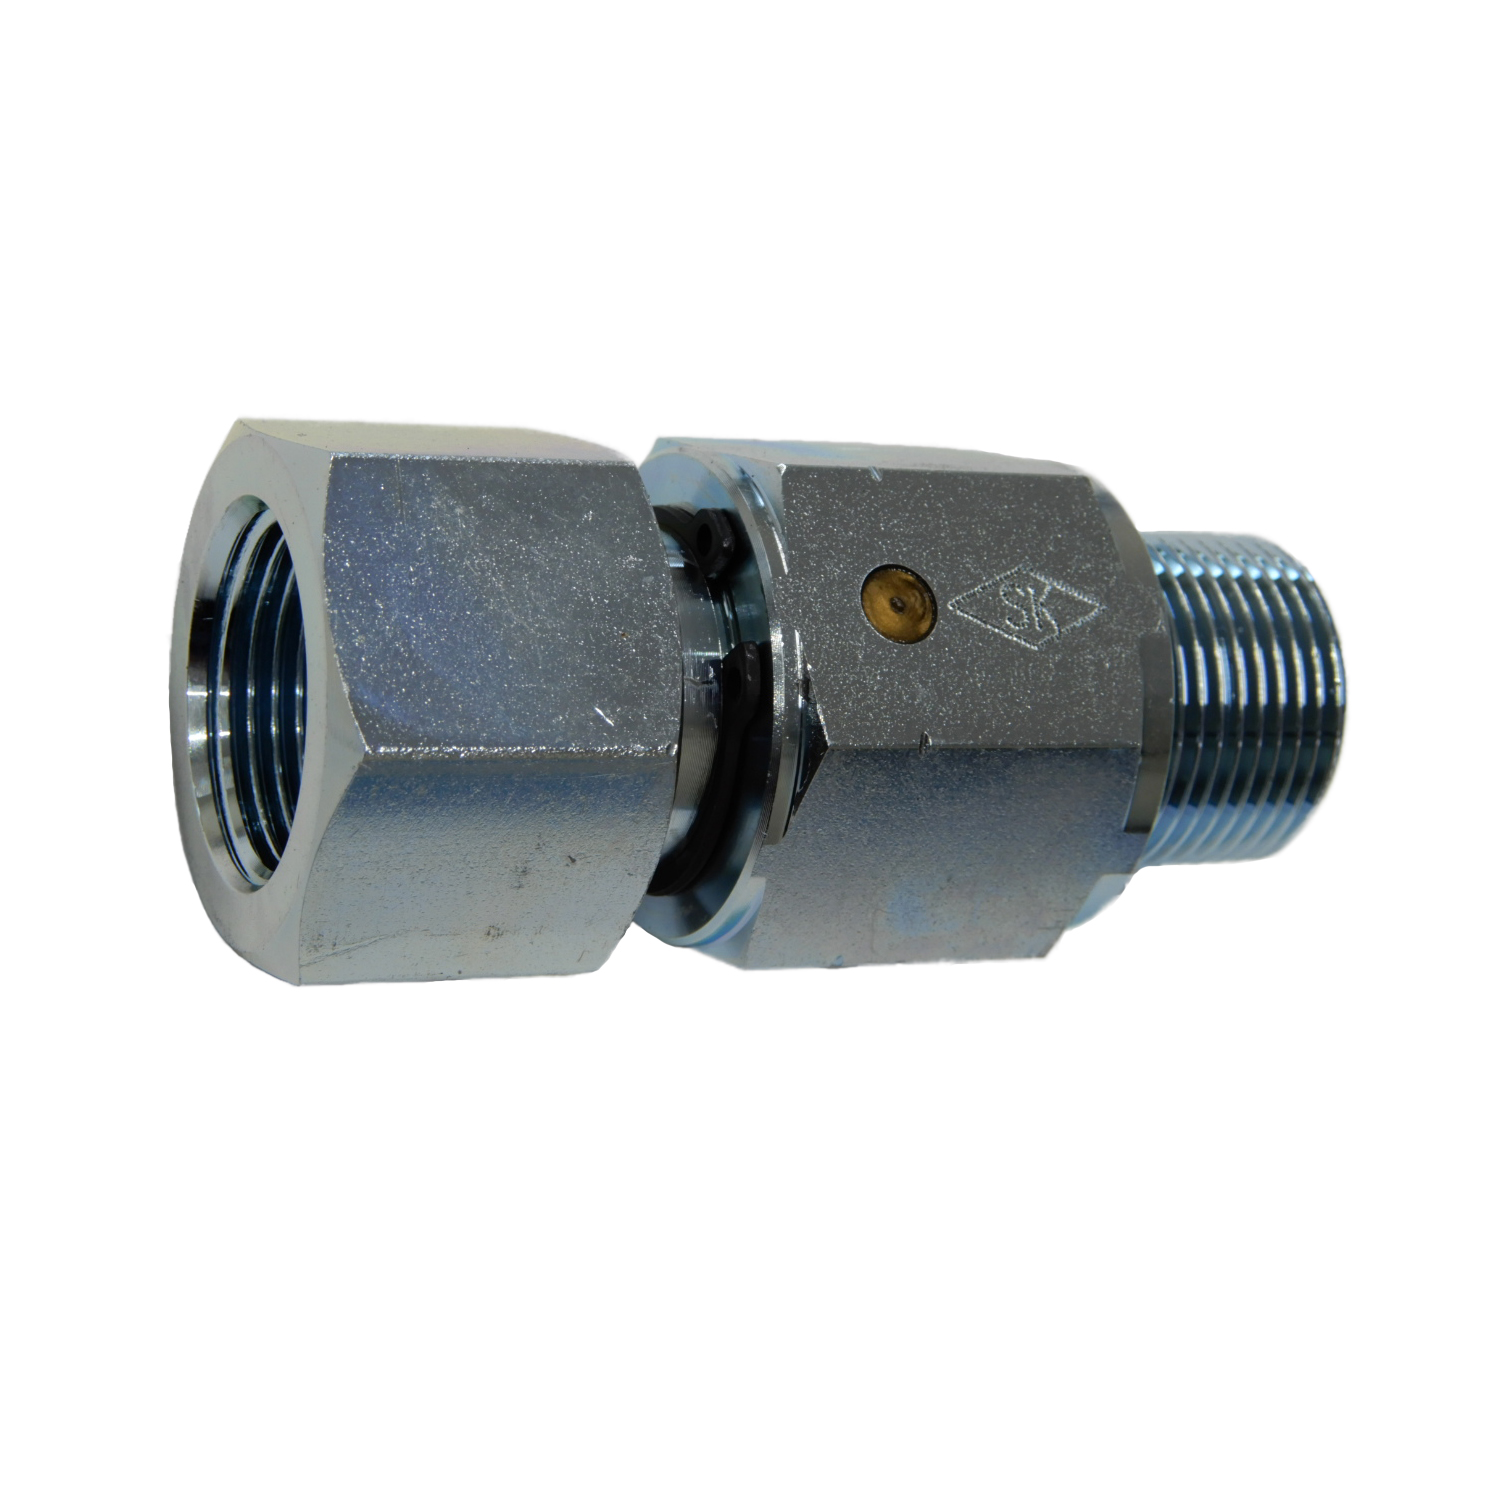 Hydraulic Hose Adapters - Swivel Adapter, Male BSPT to Female BSPT, SK Type, SK-10 Series